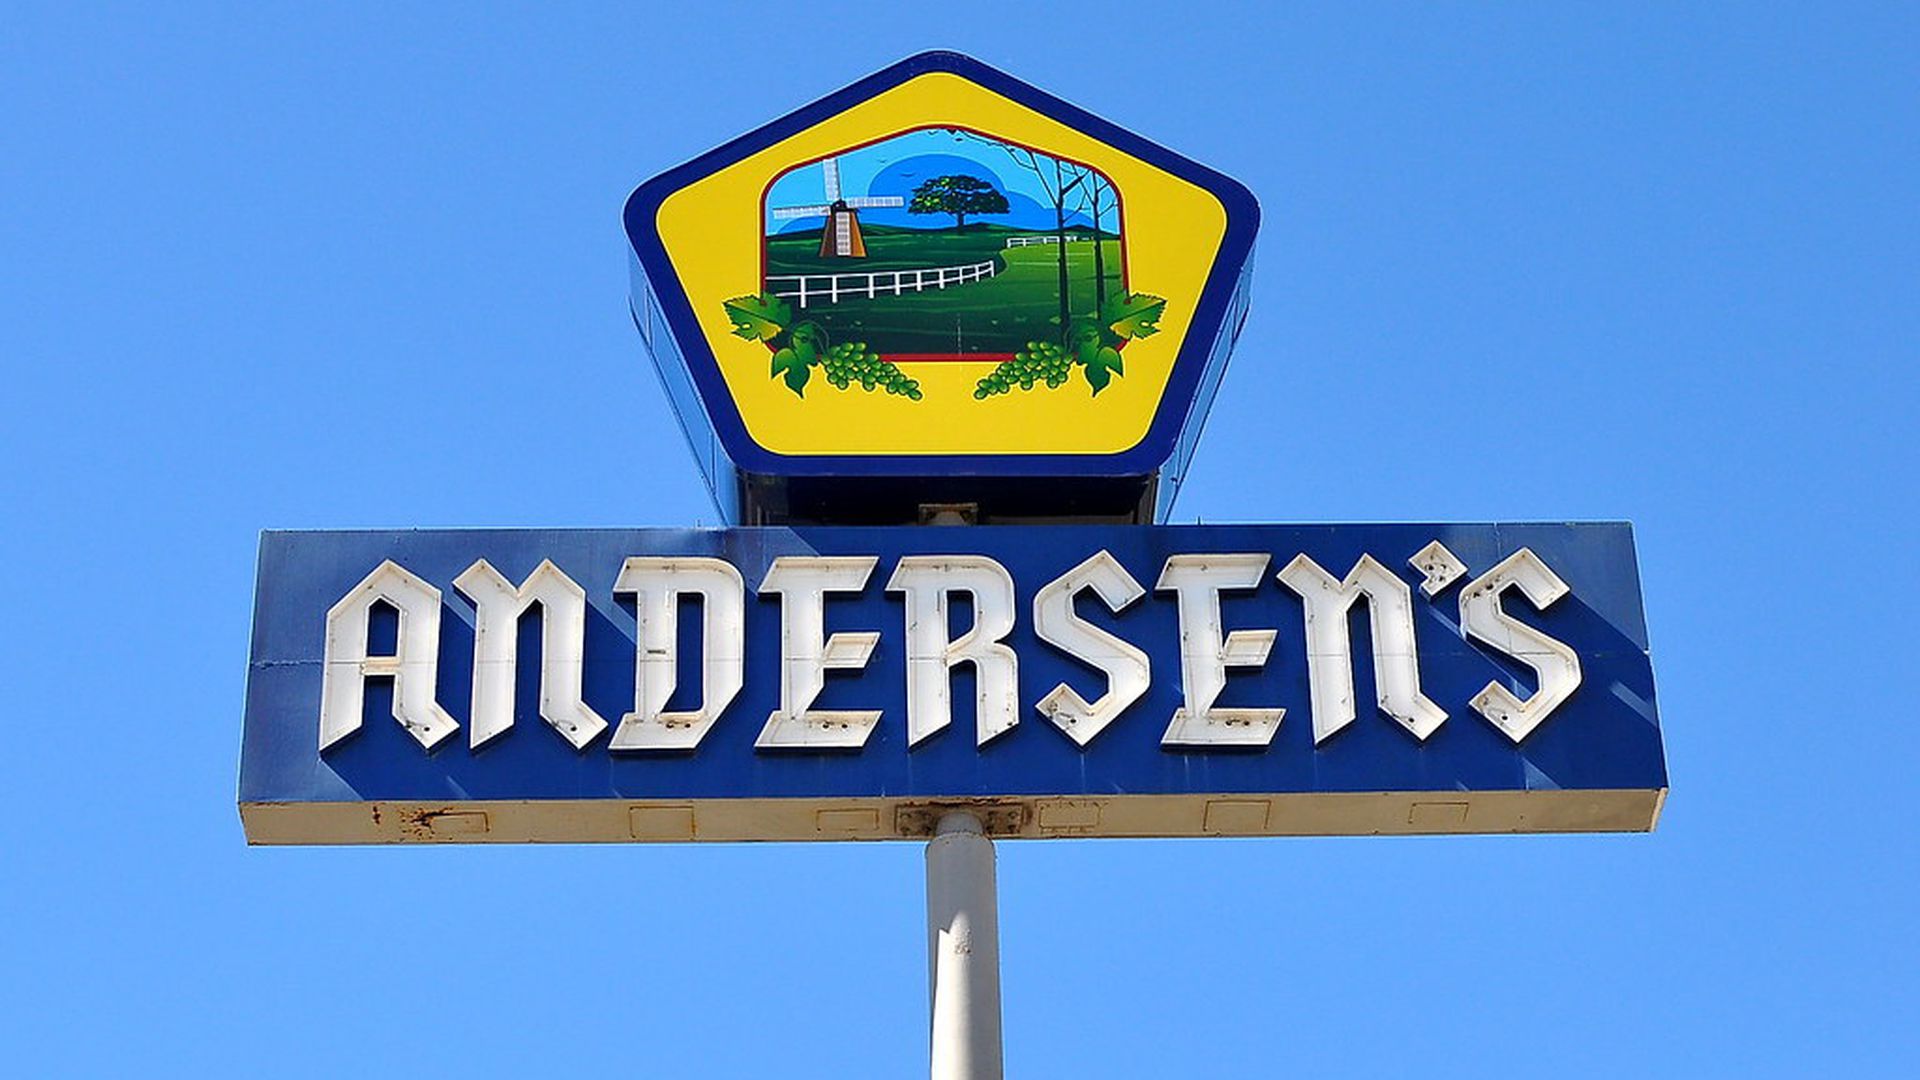 pea soup andersen’s closes suddenly after almost 100 years